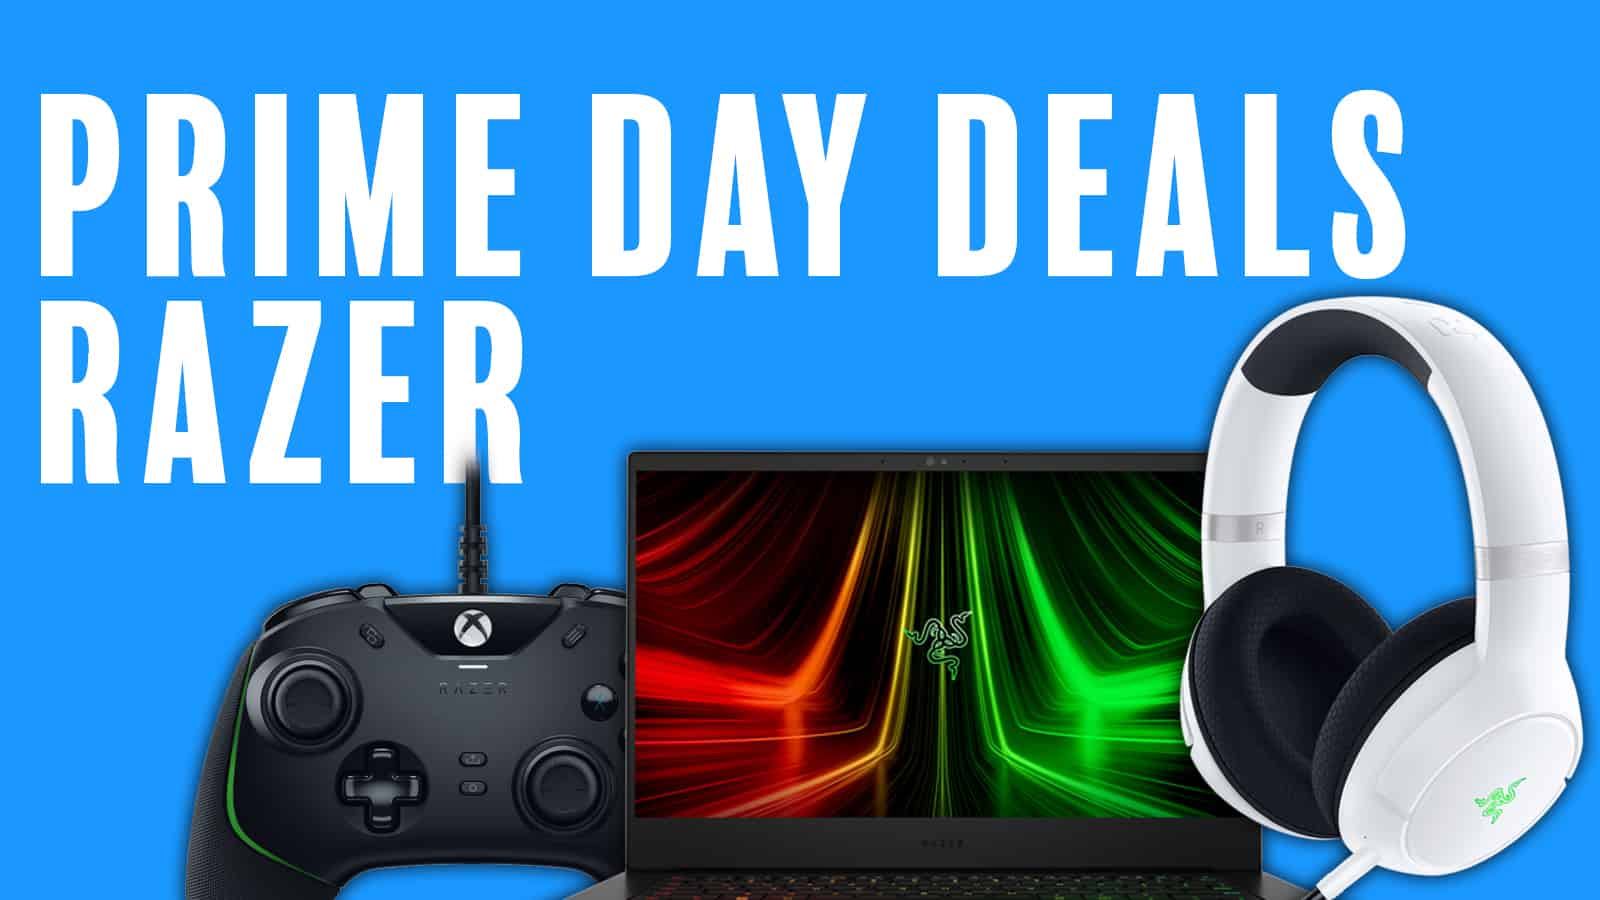 Razer Prime Day Deals 2022, blue background with controller, laptop and headset